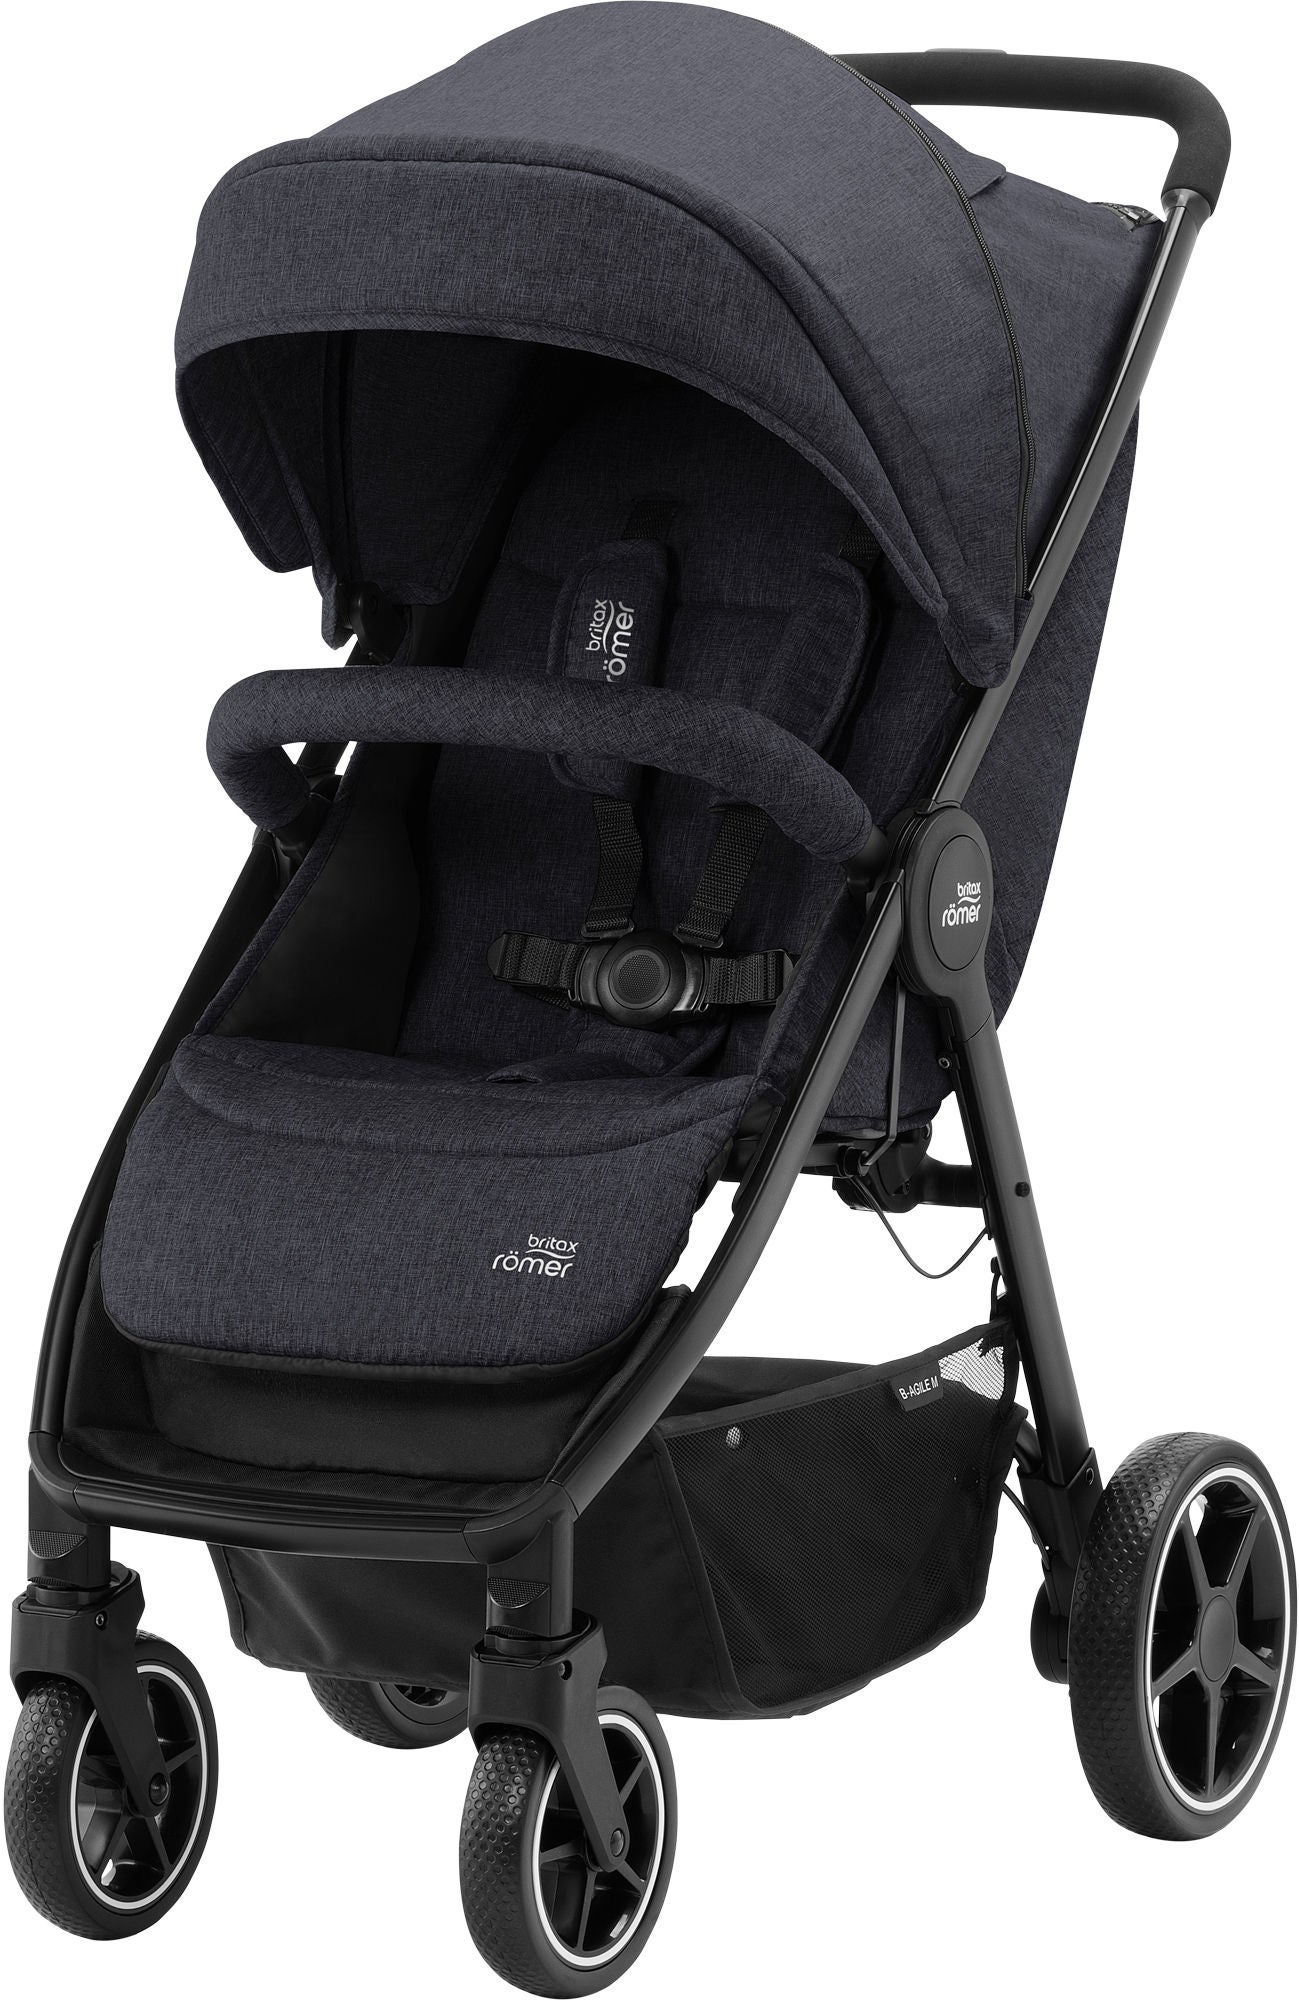 Featured image for “Britax B-Agile M Sittvagn, Black Shadow”